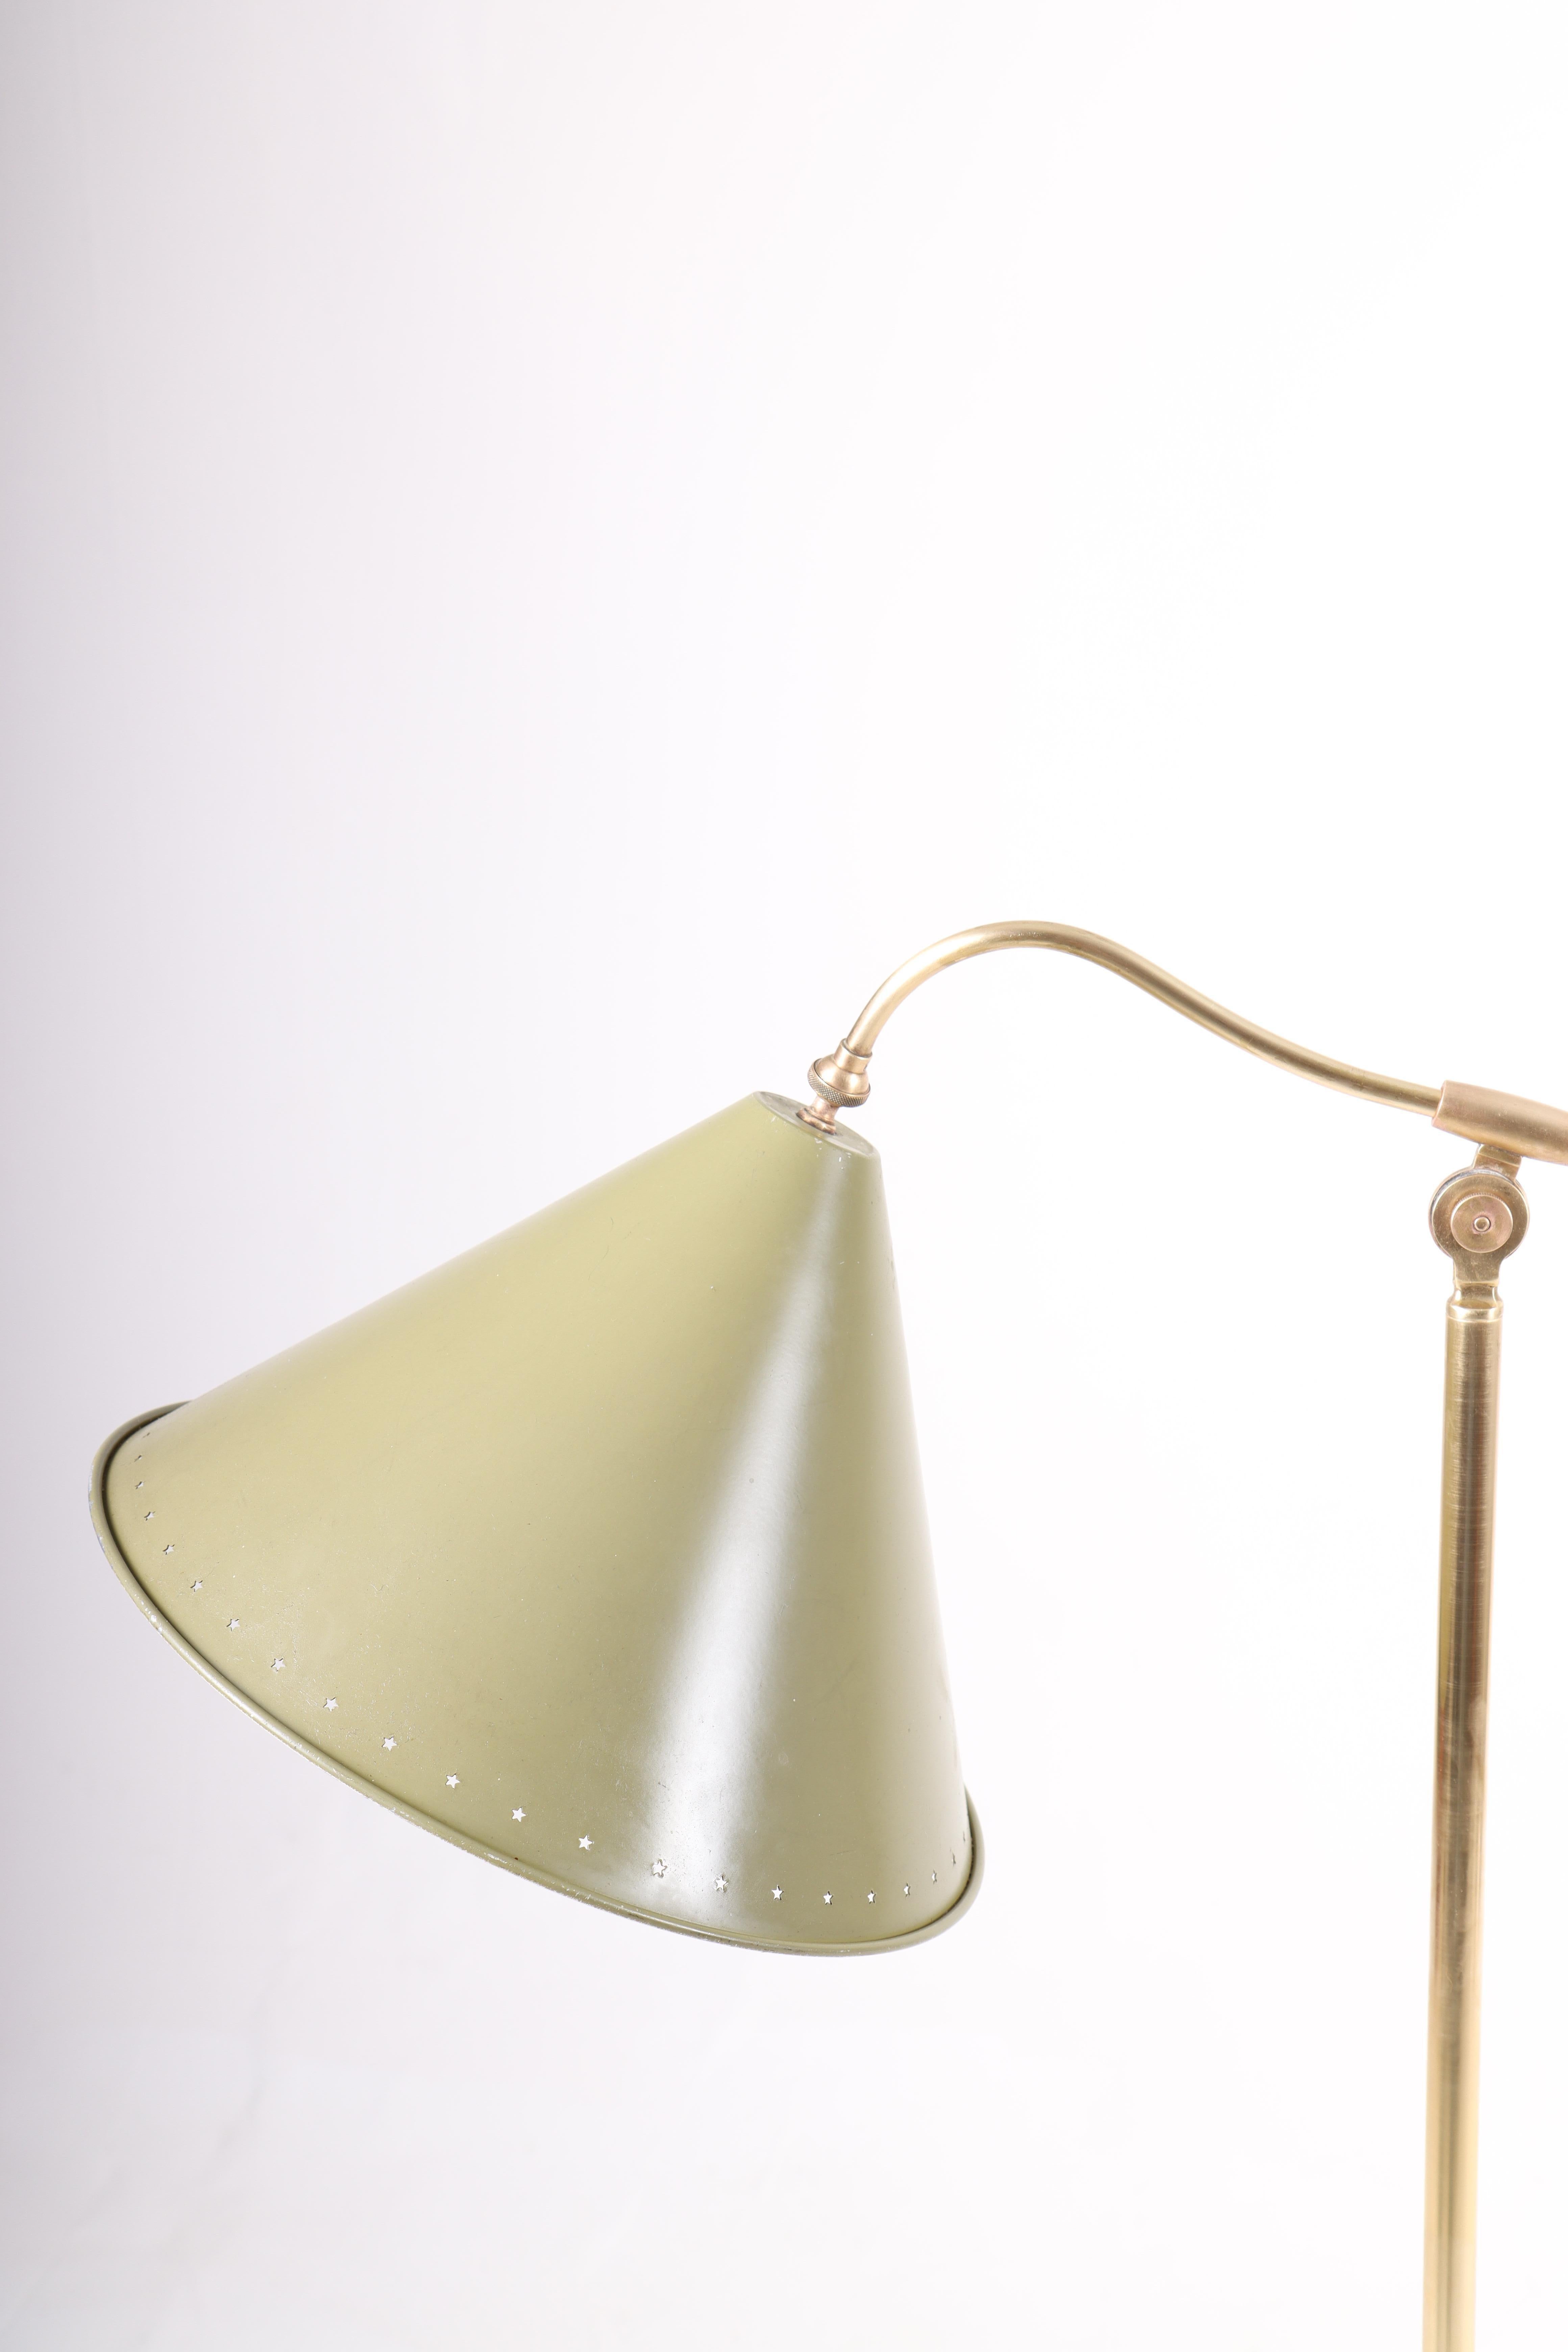 Danish floor light in patinated brass. Designed and made for Lyfa in the 1940s-1950s. Great condition.